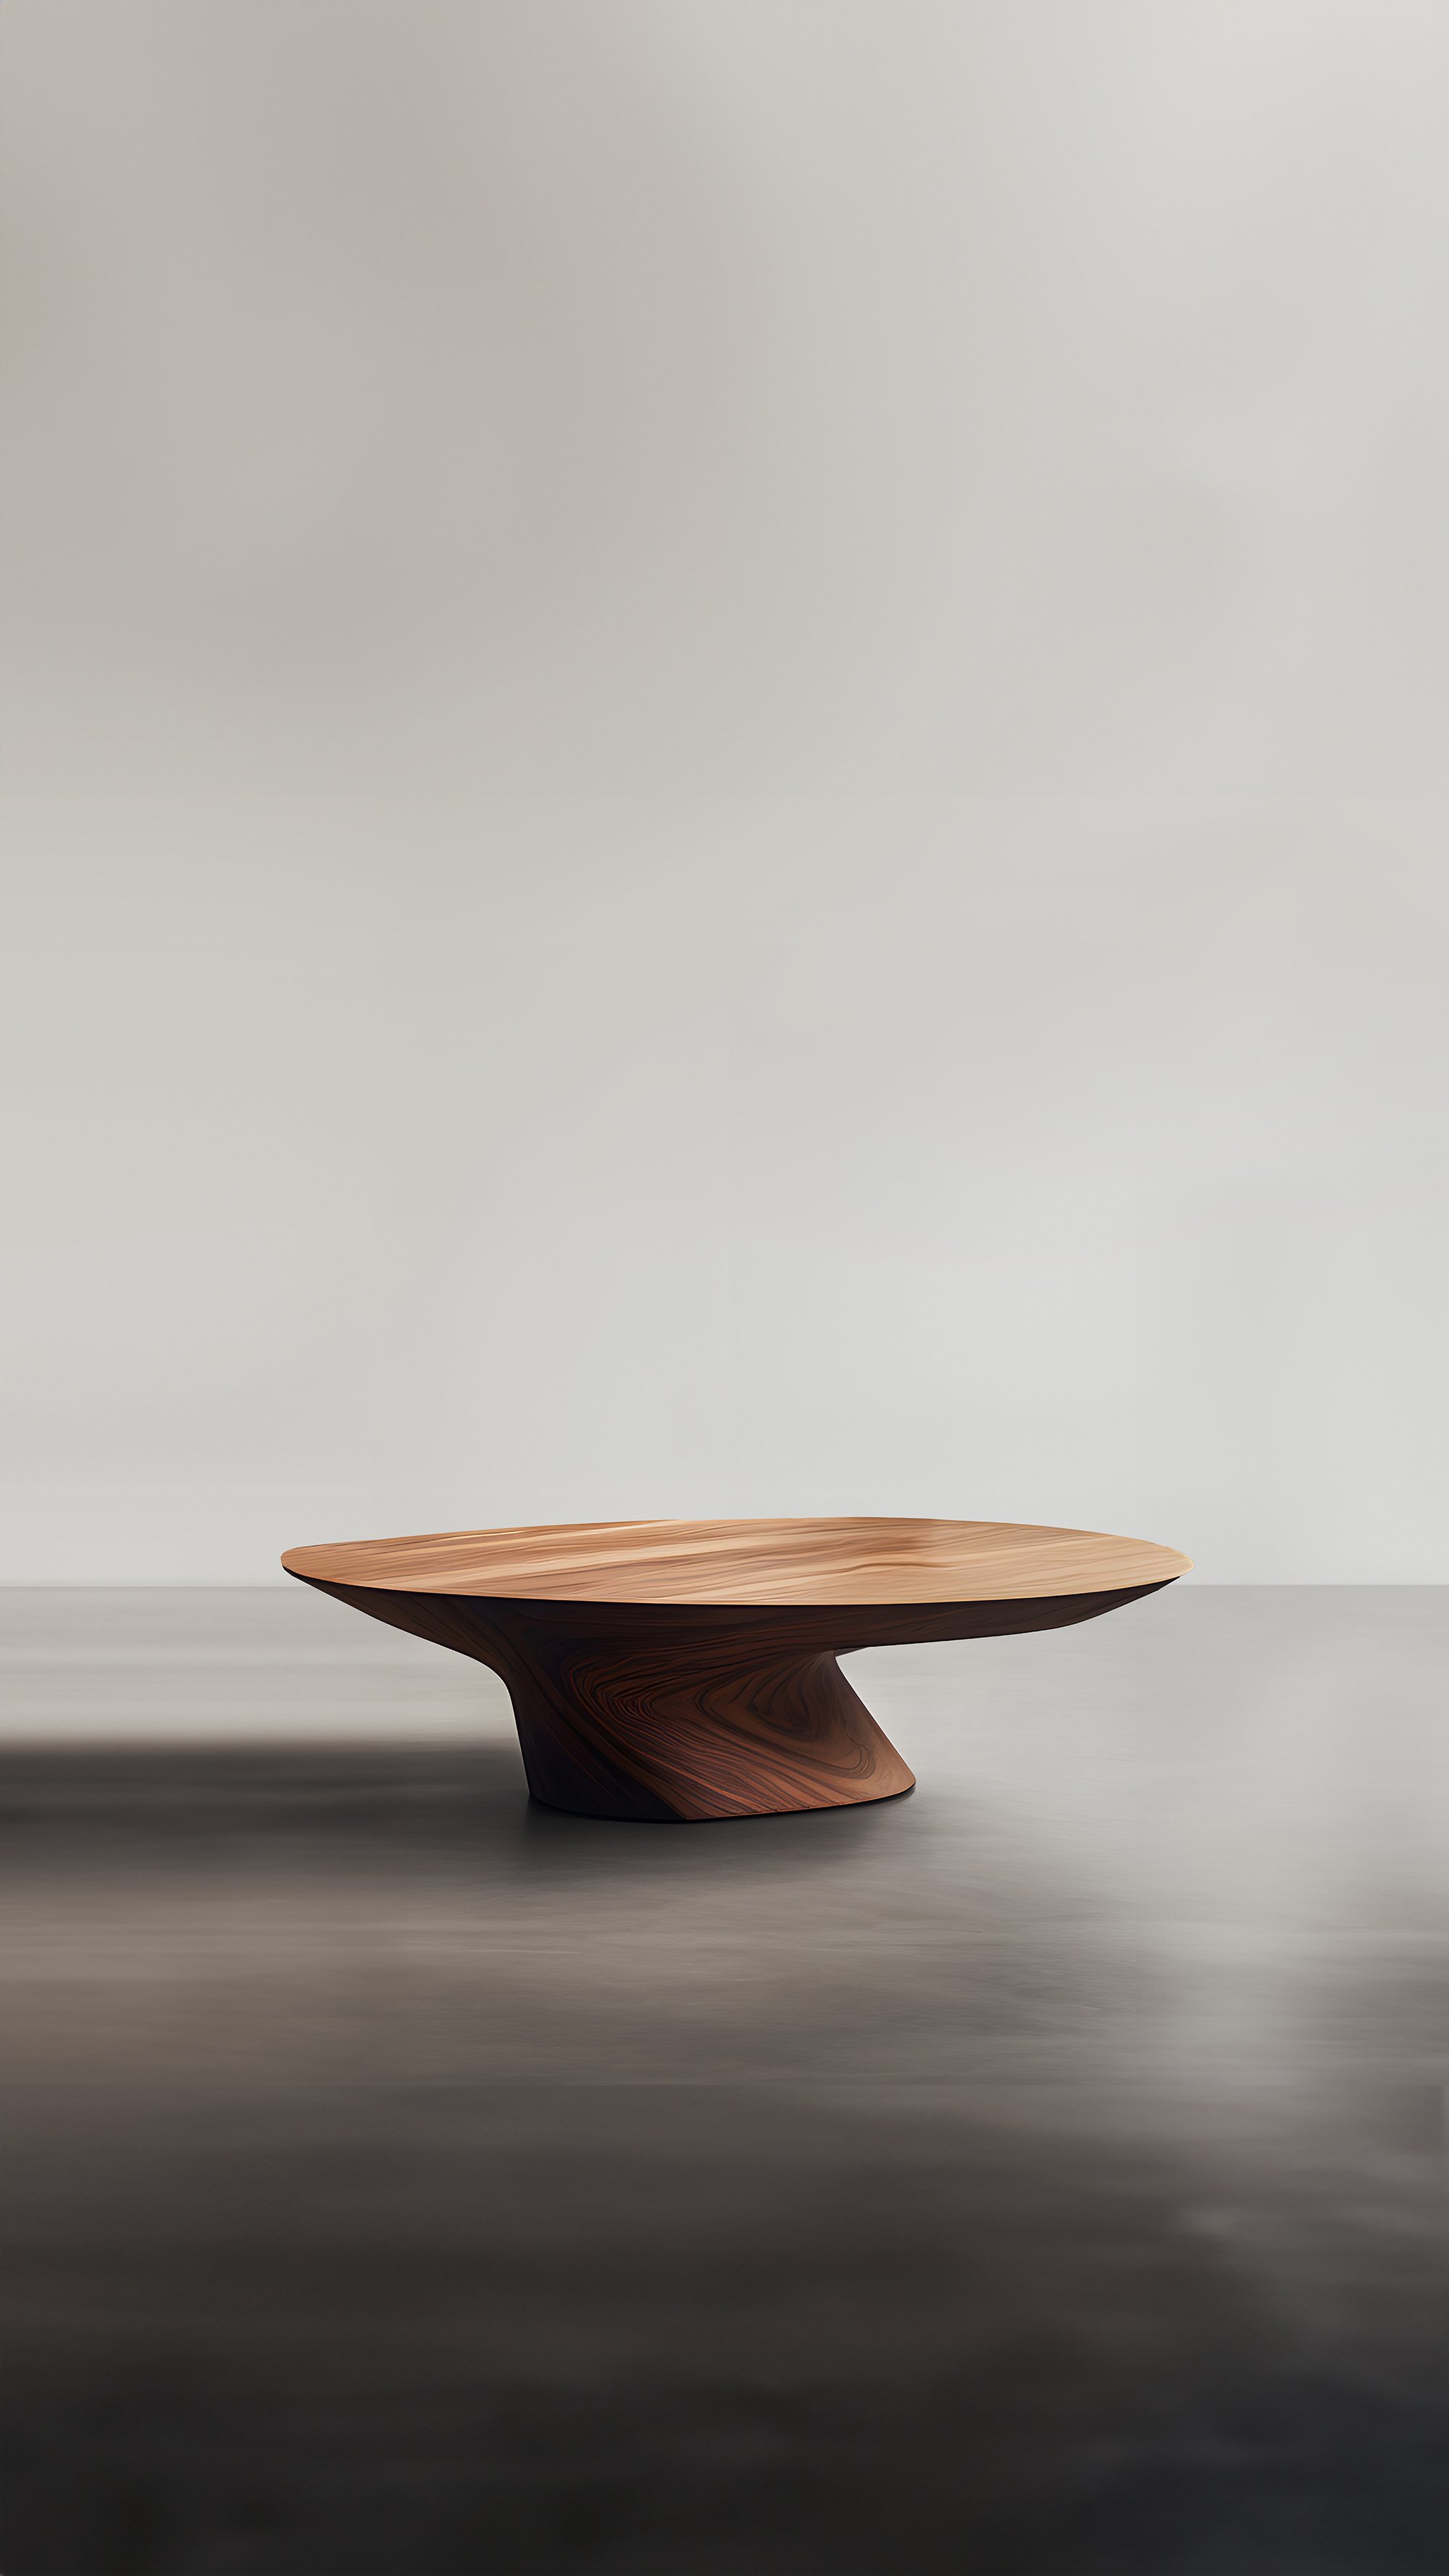 Sculptural Coffee Table Made of Solid Wood, Center Table Solace S47 by Joel Escalona — 6.jpg